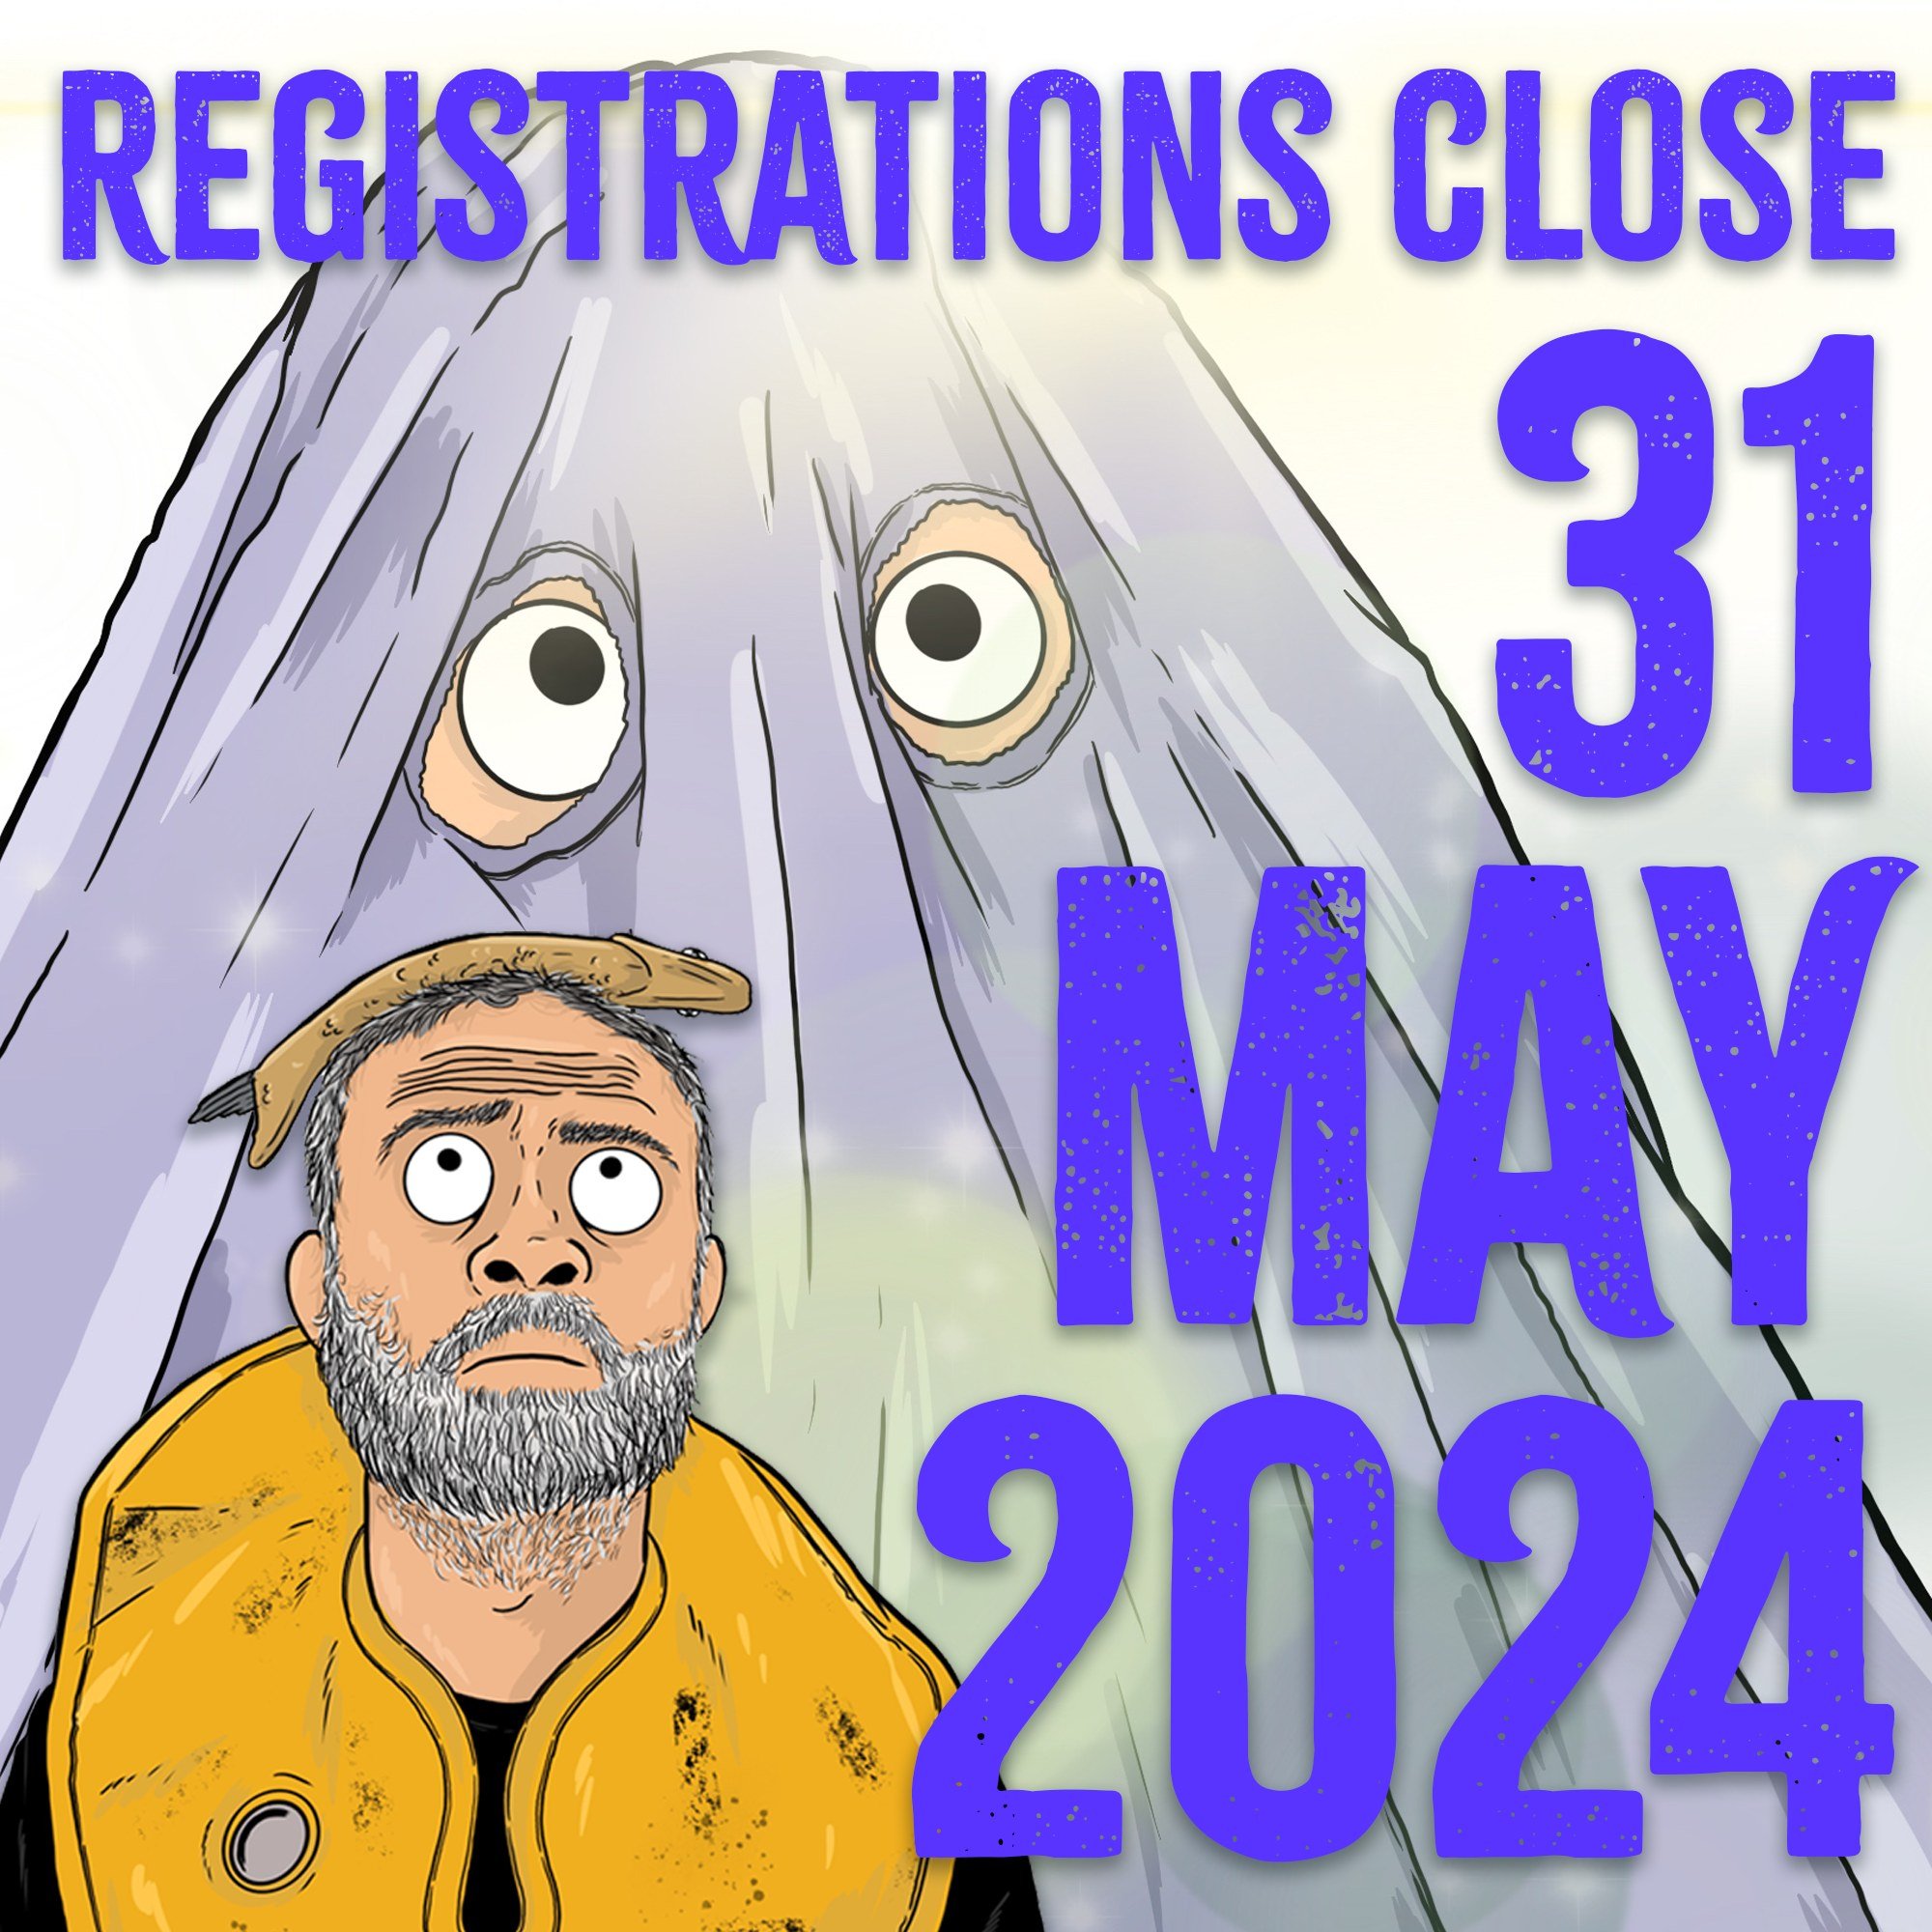 Registrations are closing at the end of this month! 

If there are any questions you have around Fringe registrations - sing out! We would love to hear from you.